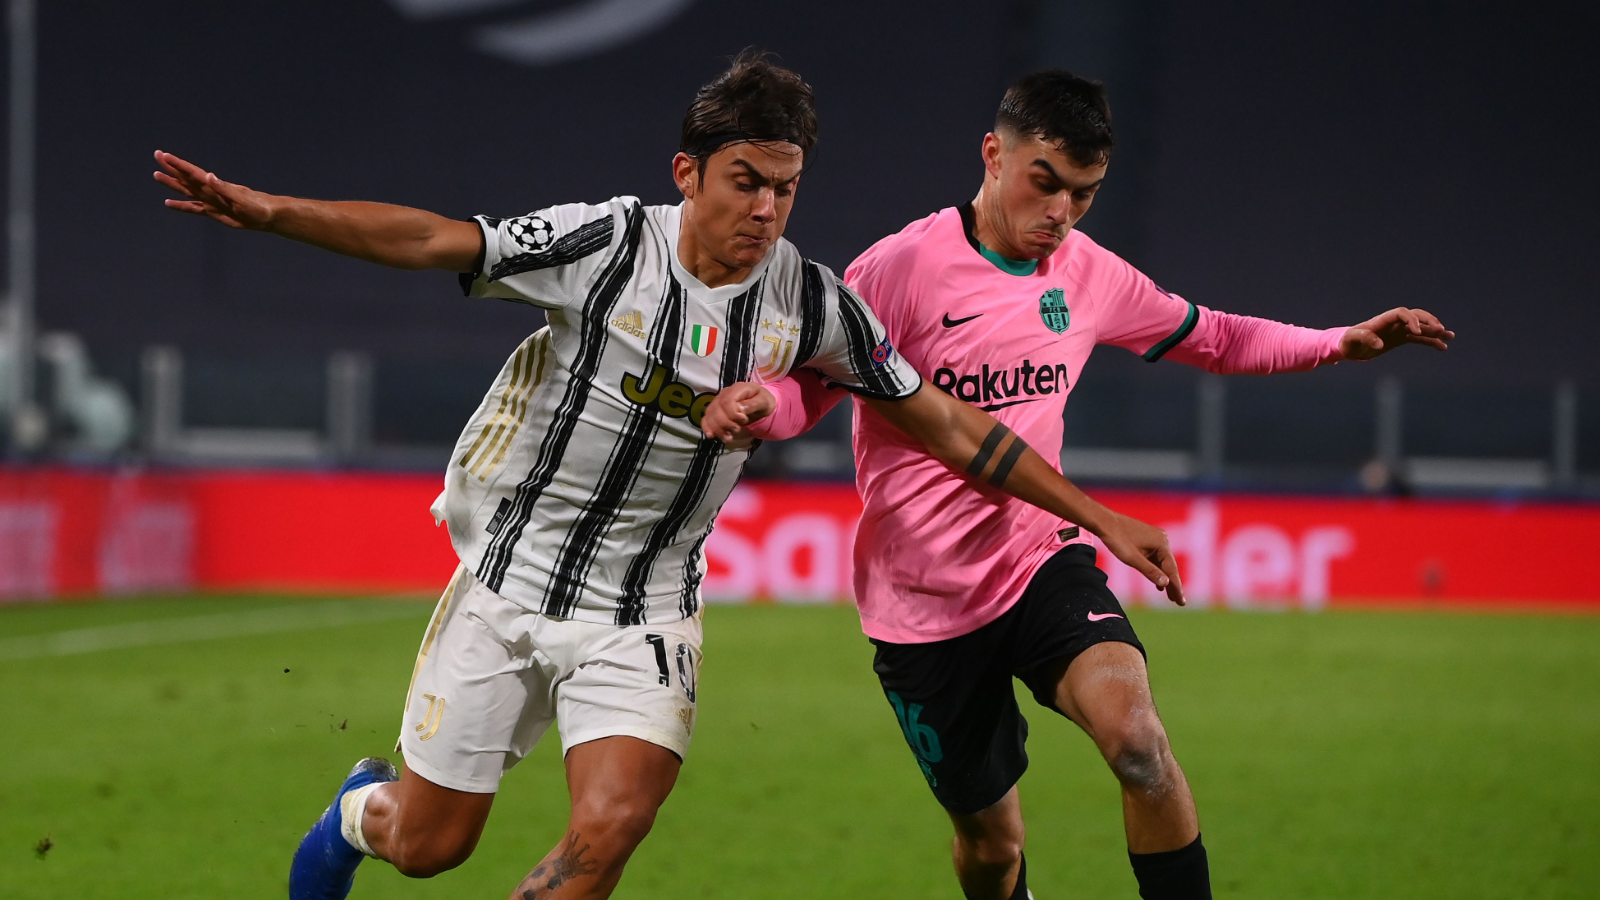 Barcelona's signing of the decade? Teenage star Pedri making the perfect first impression